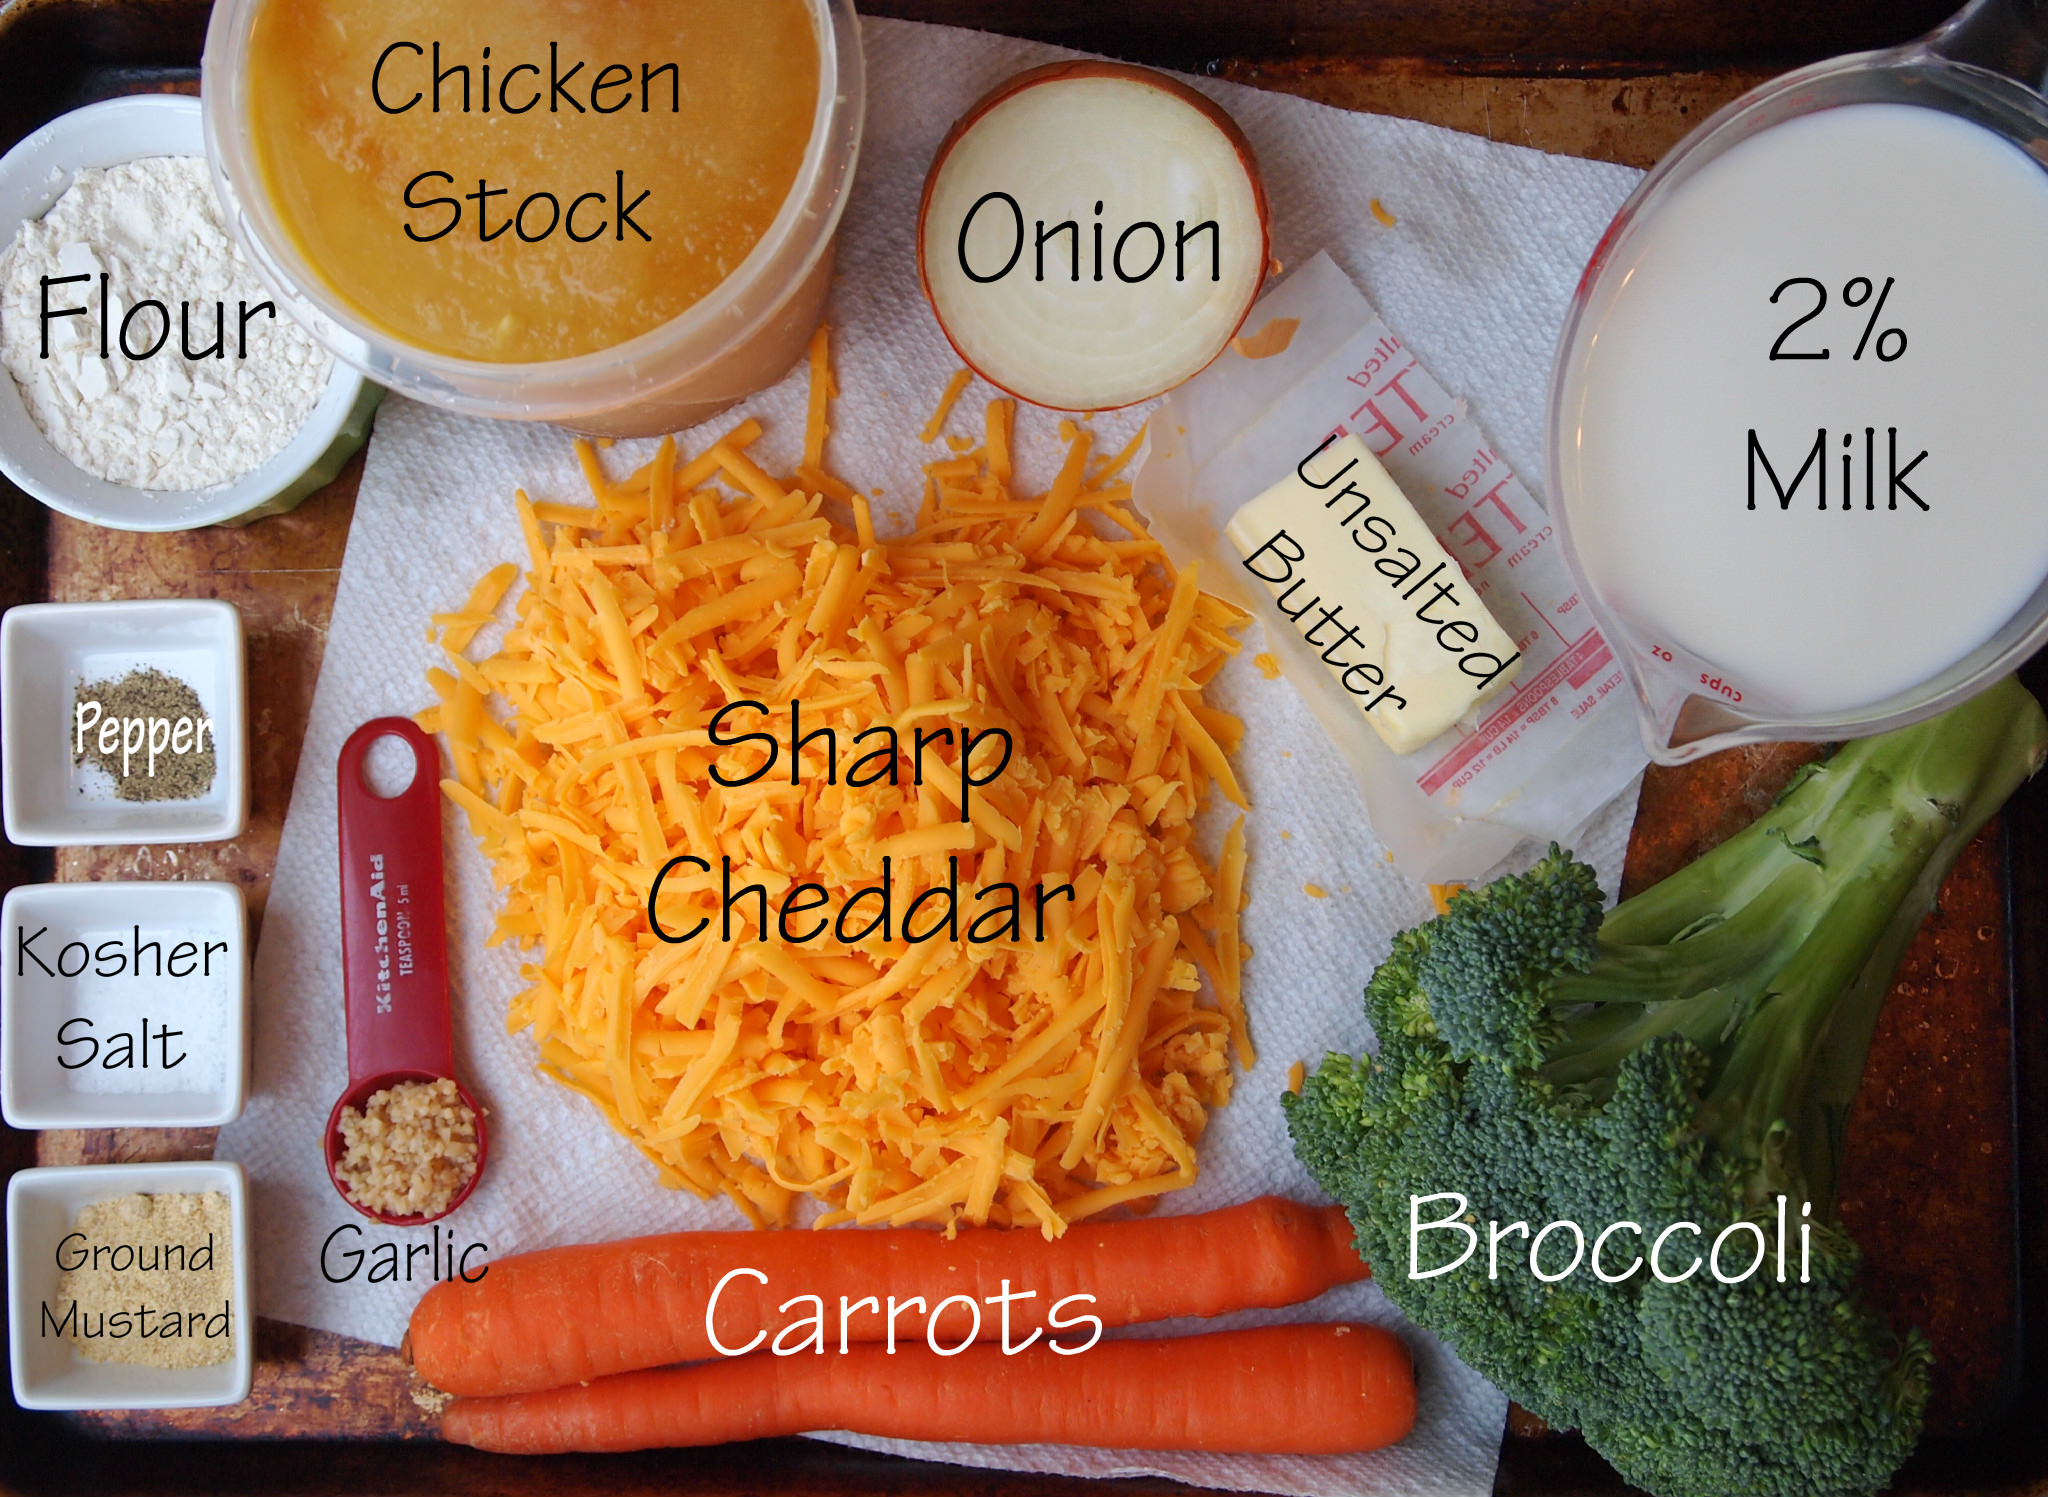 Ingredients needed to make homemade broccoli cheddar soup